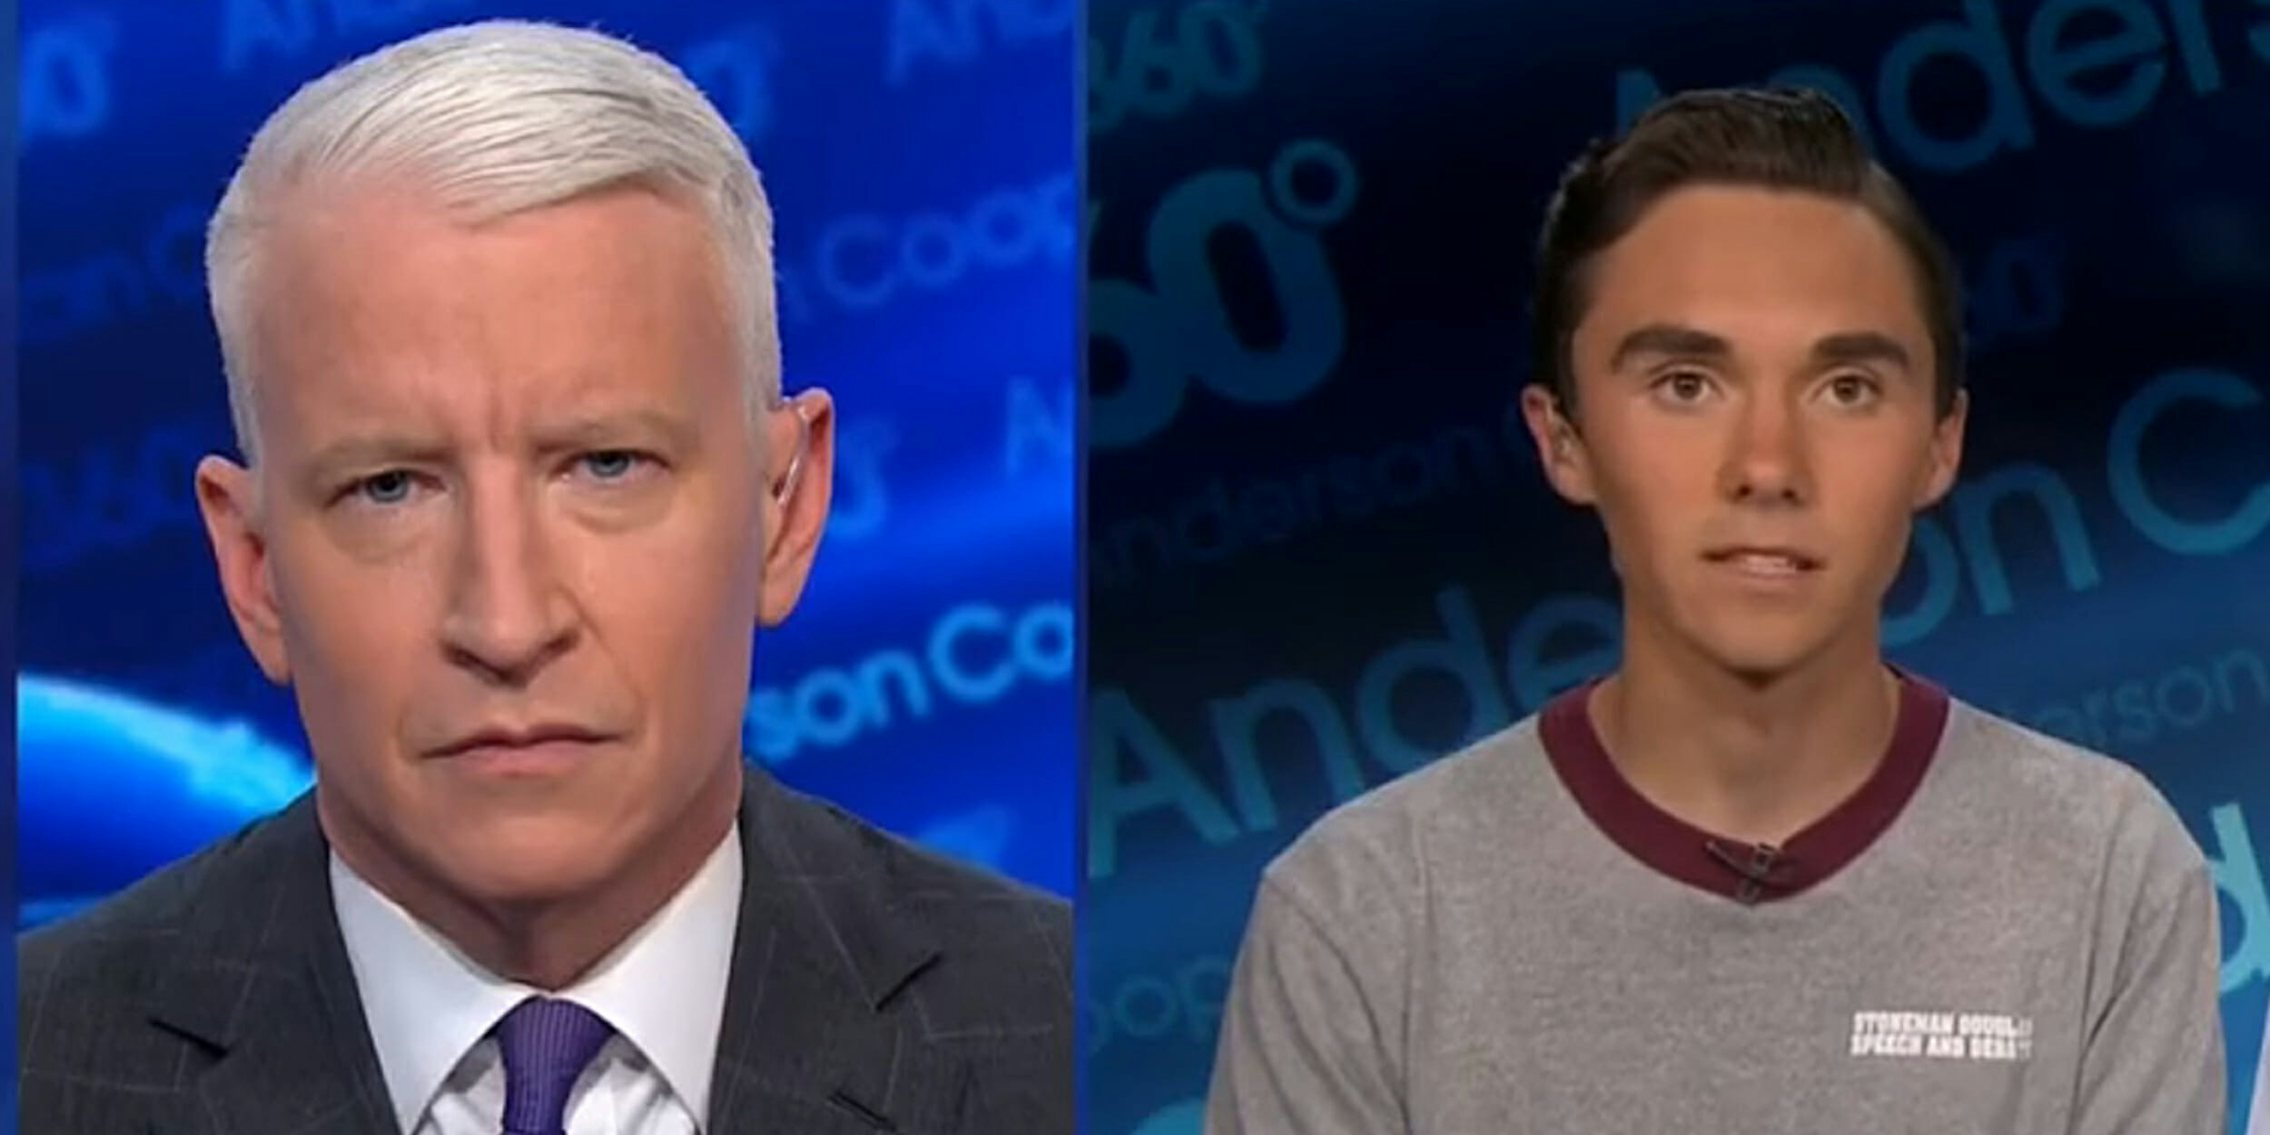 Anderson Cooper and David Hogg